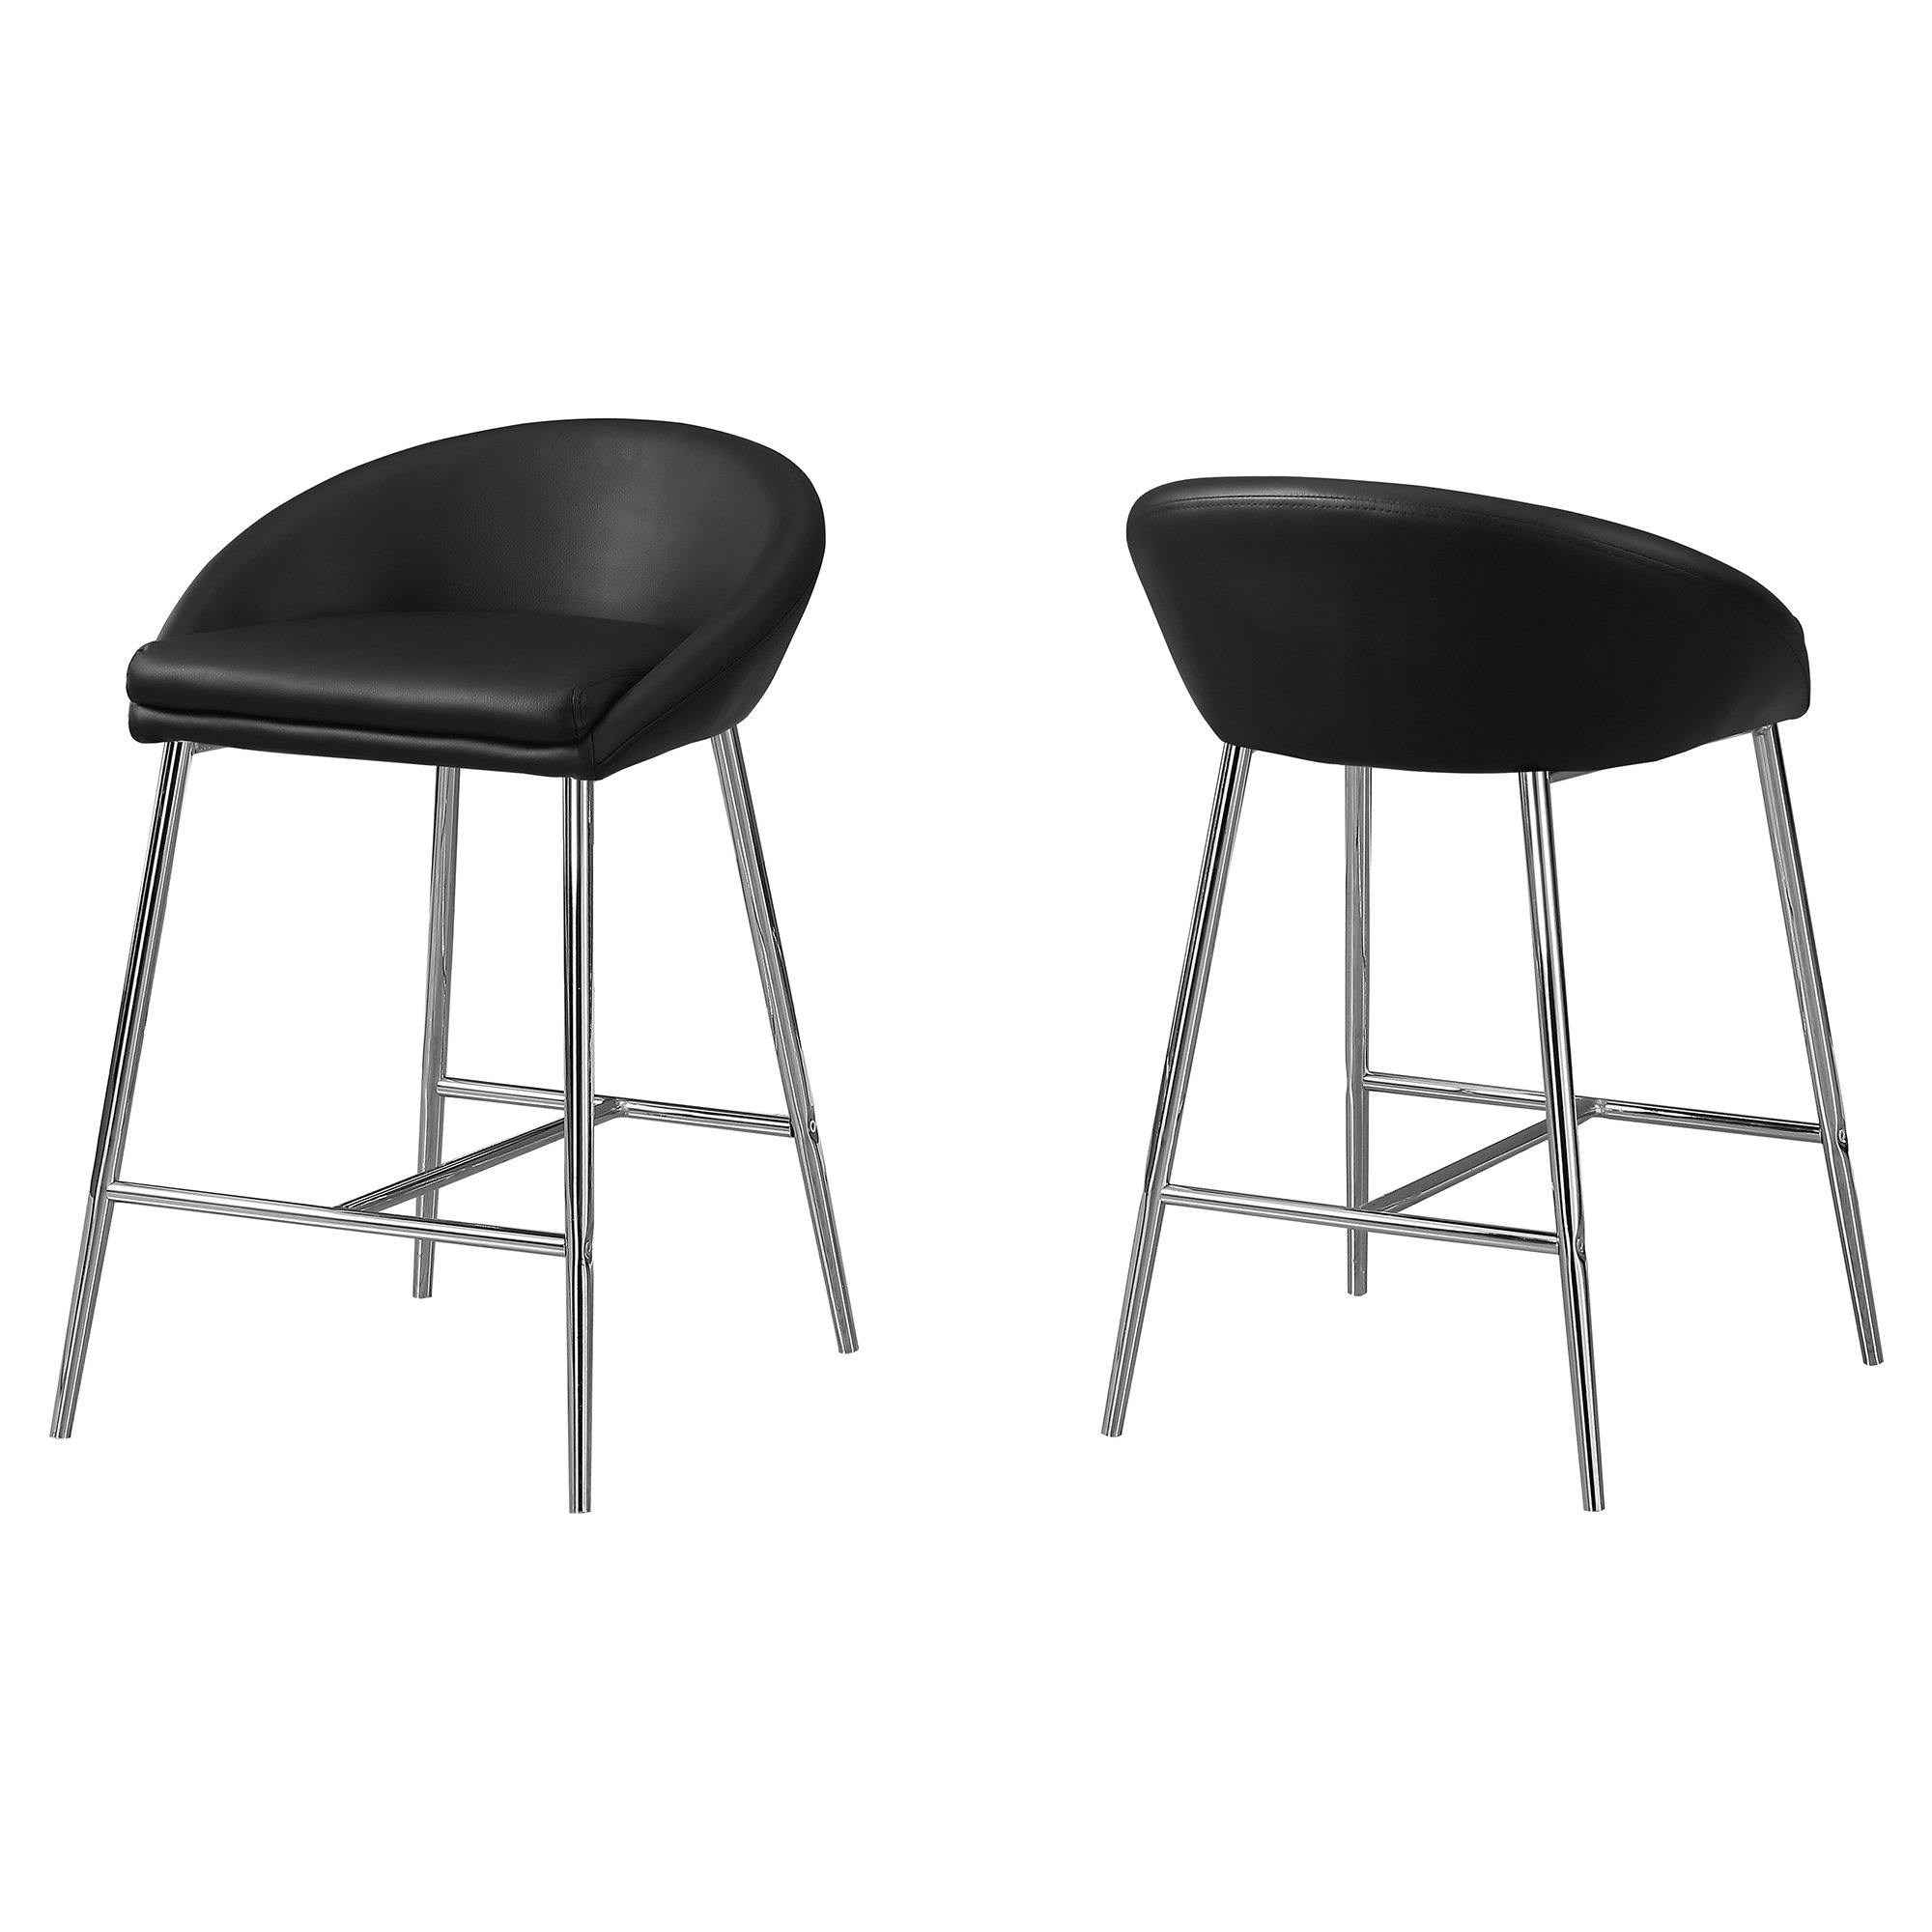 Set of 2 Black Leather-Look Seat and Metal Frame Accent Chair